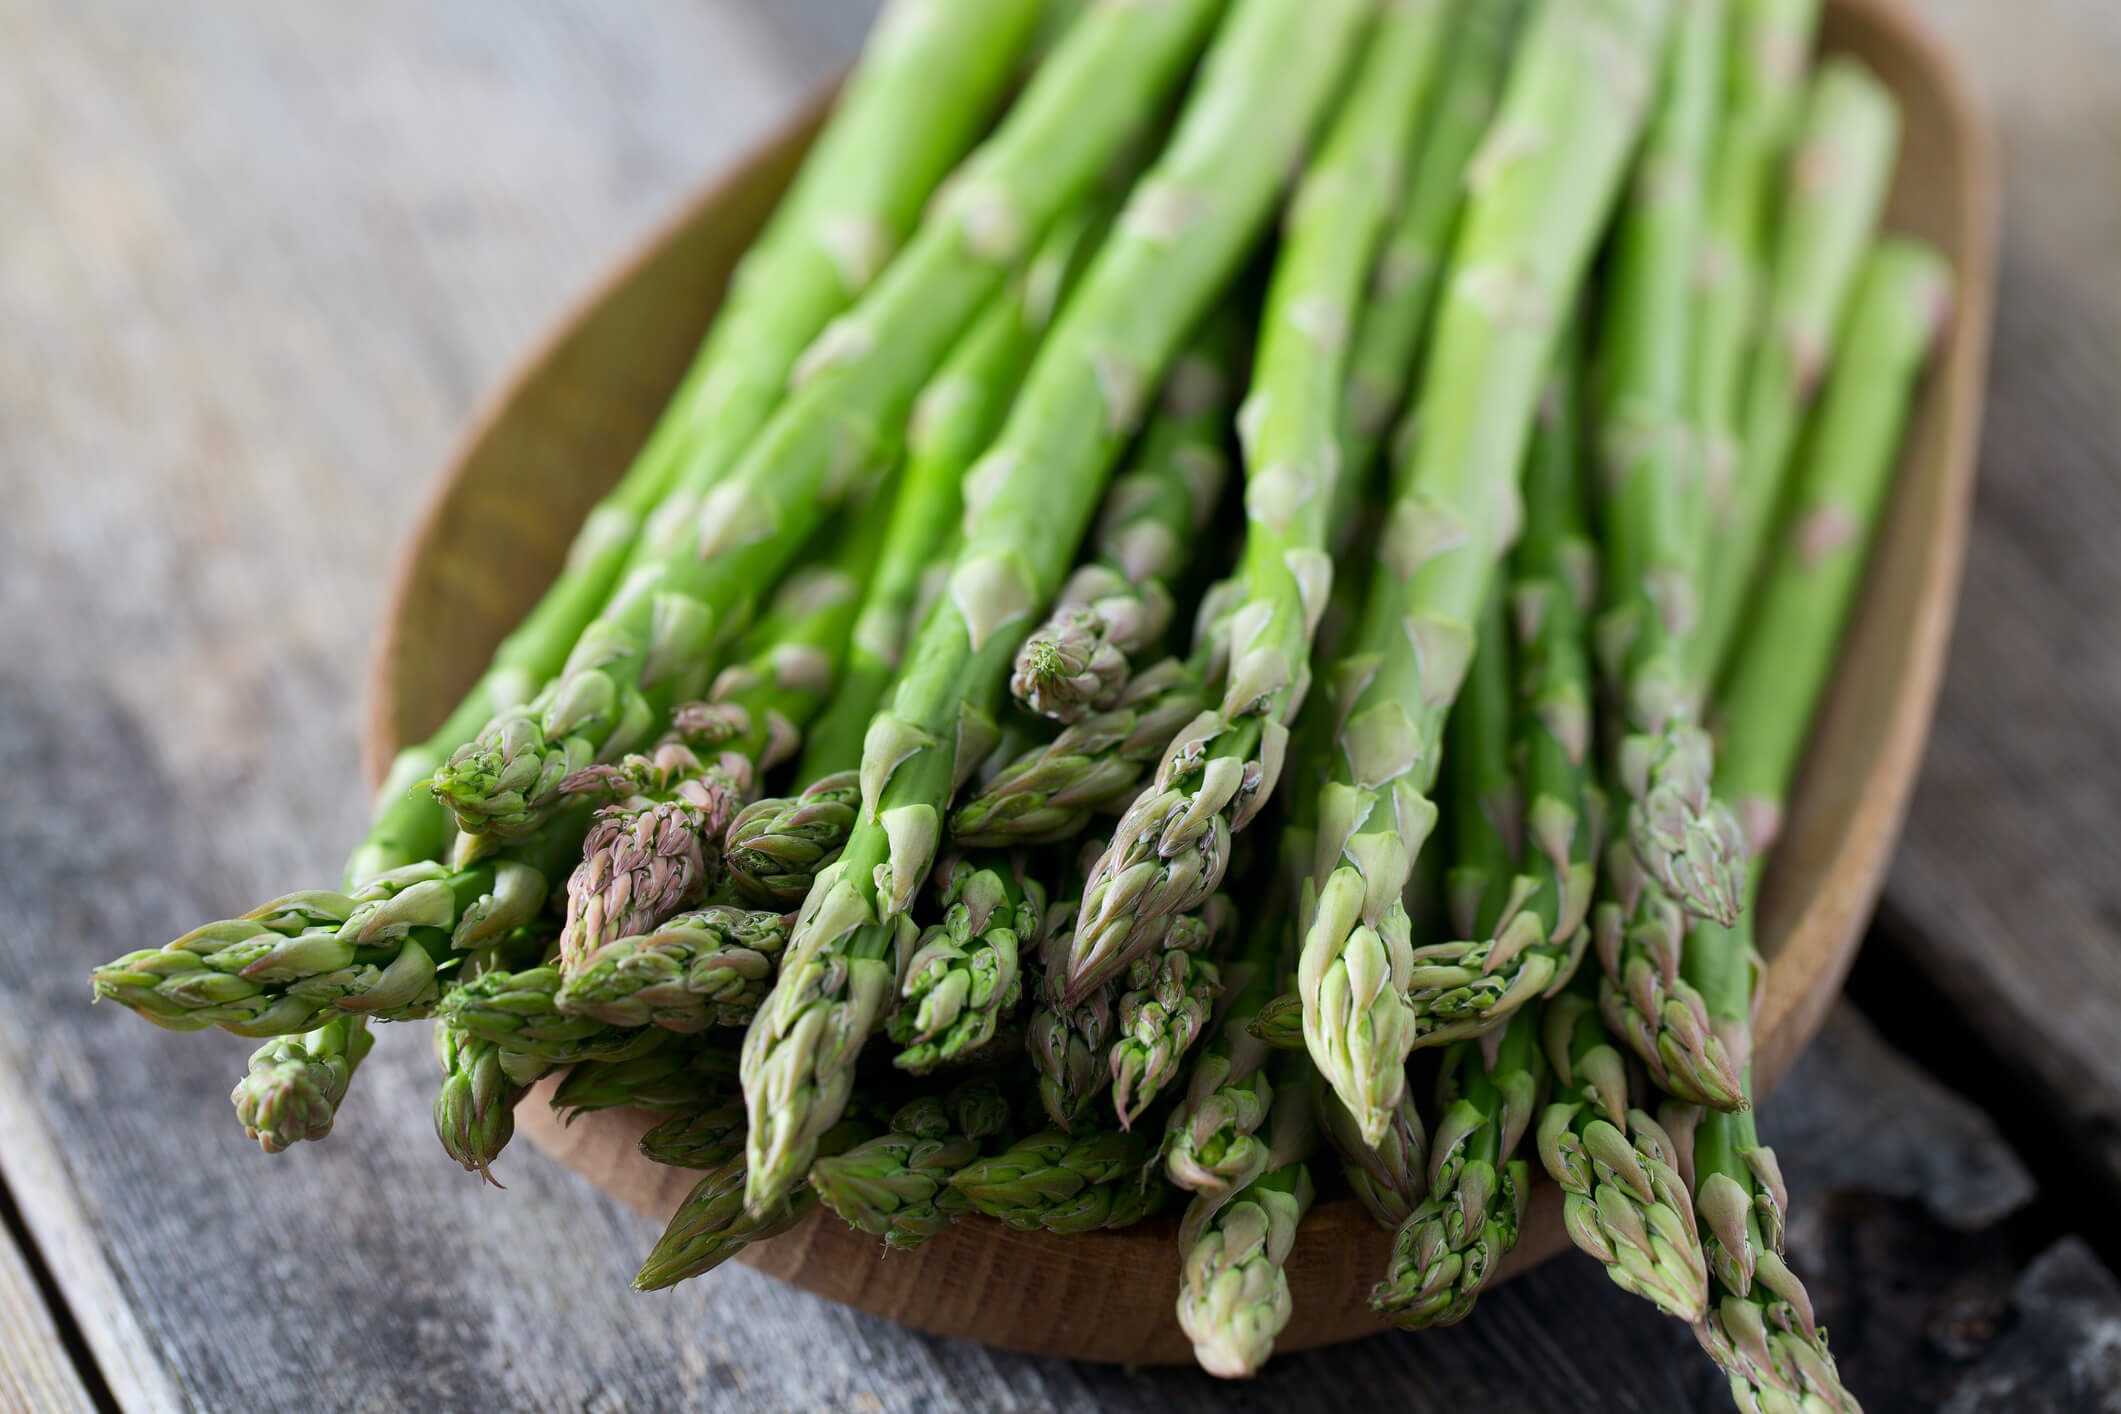 Spring vegetables and fruits: asparagus